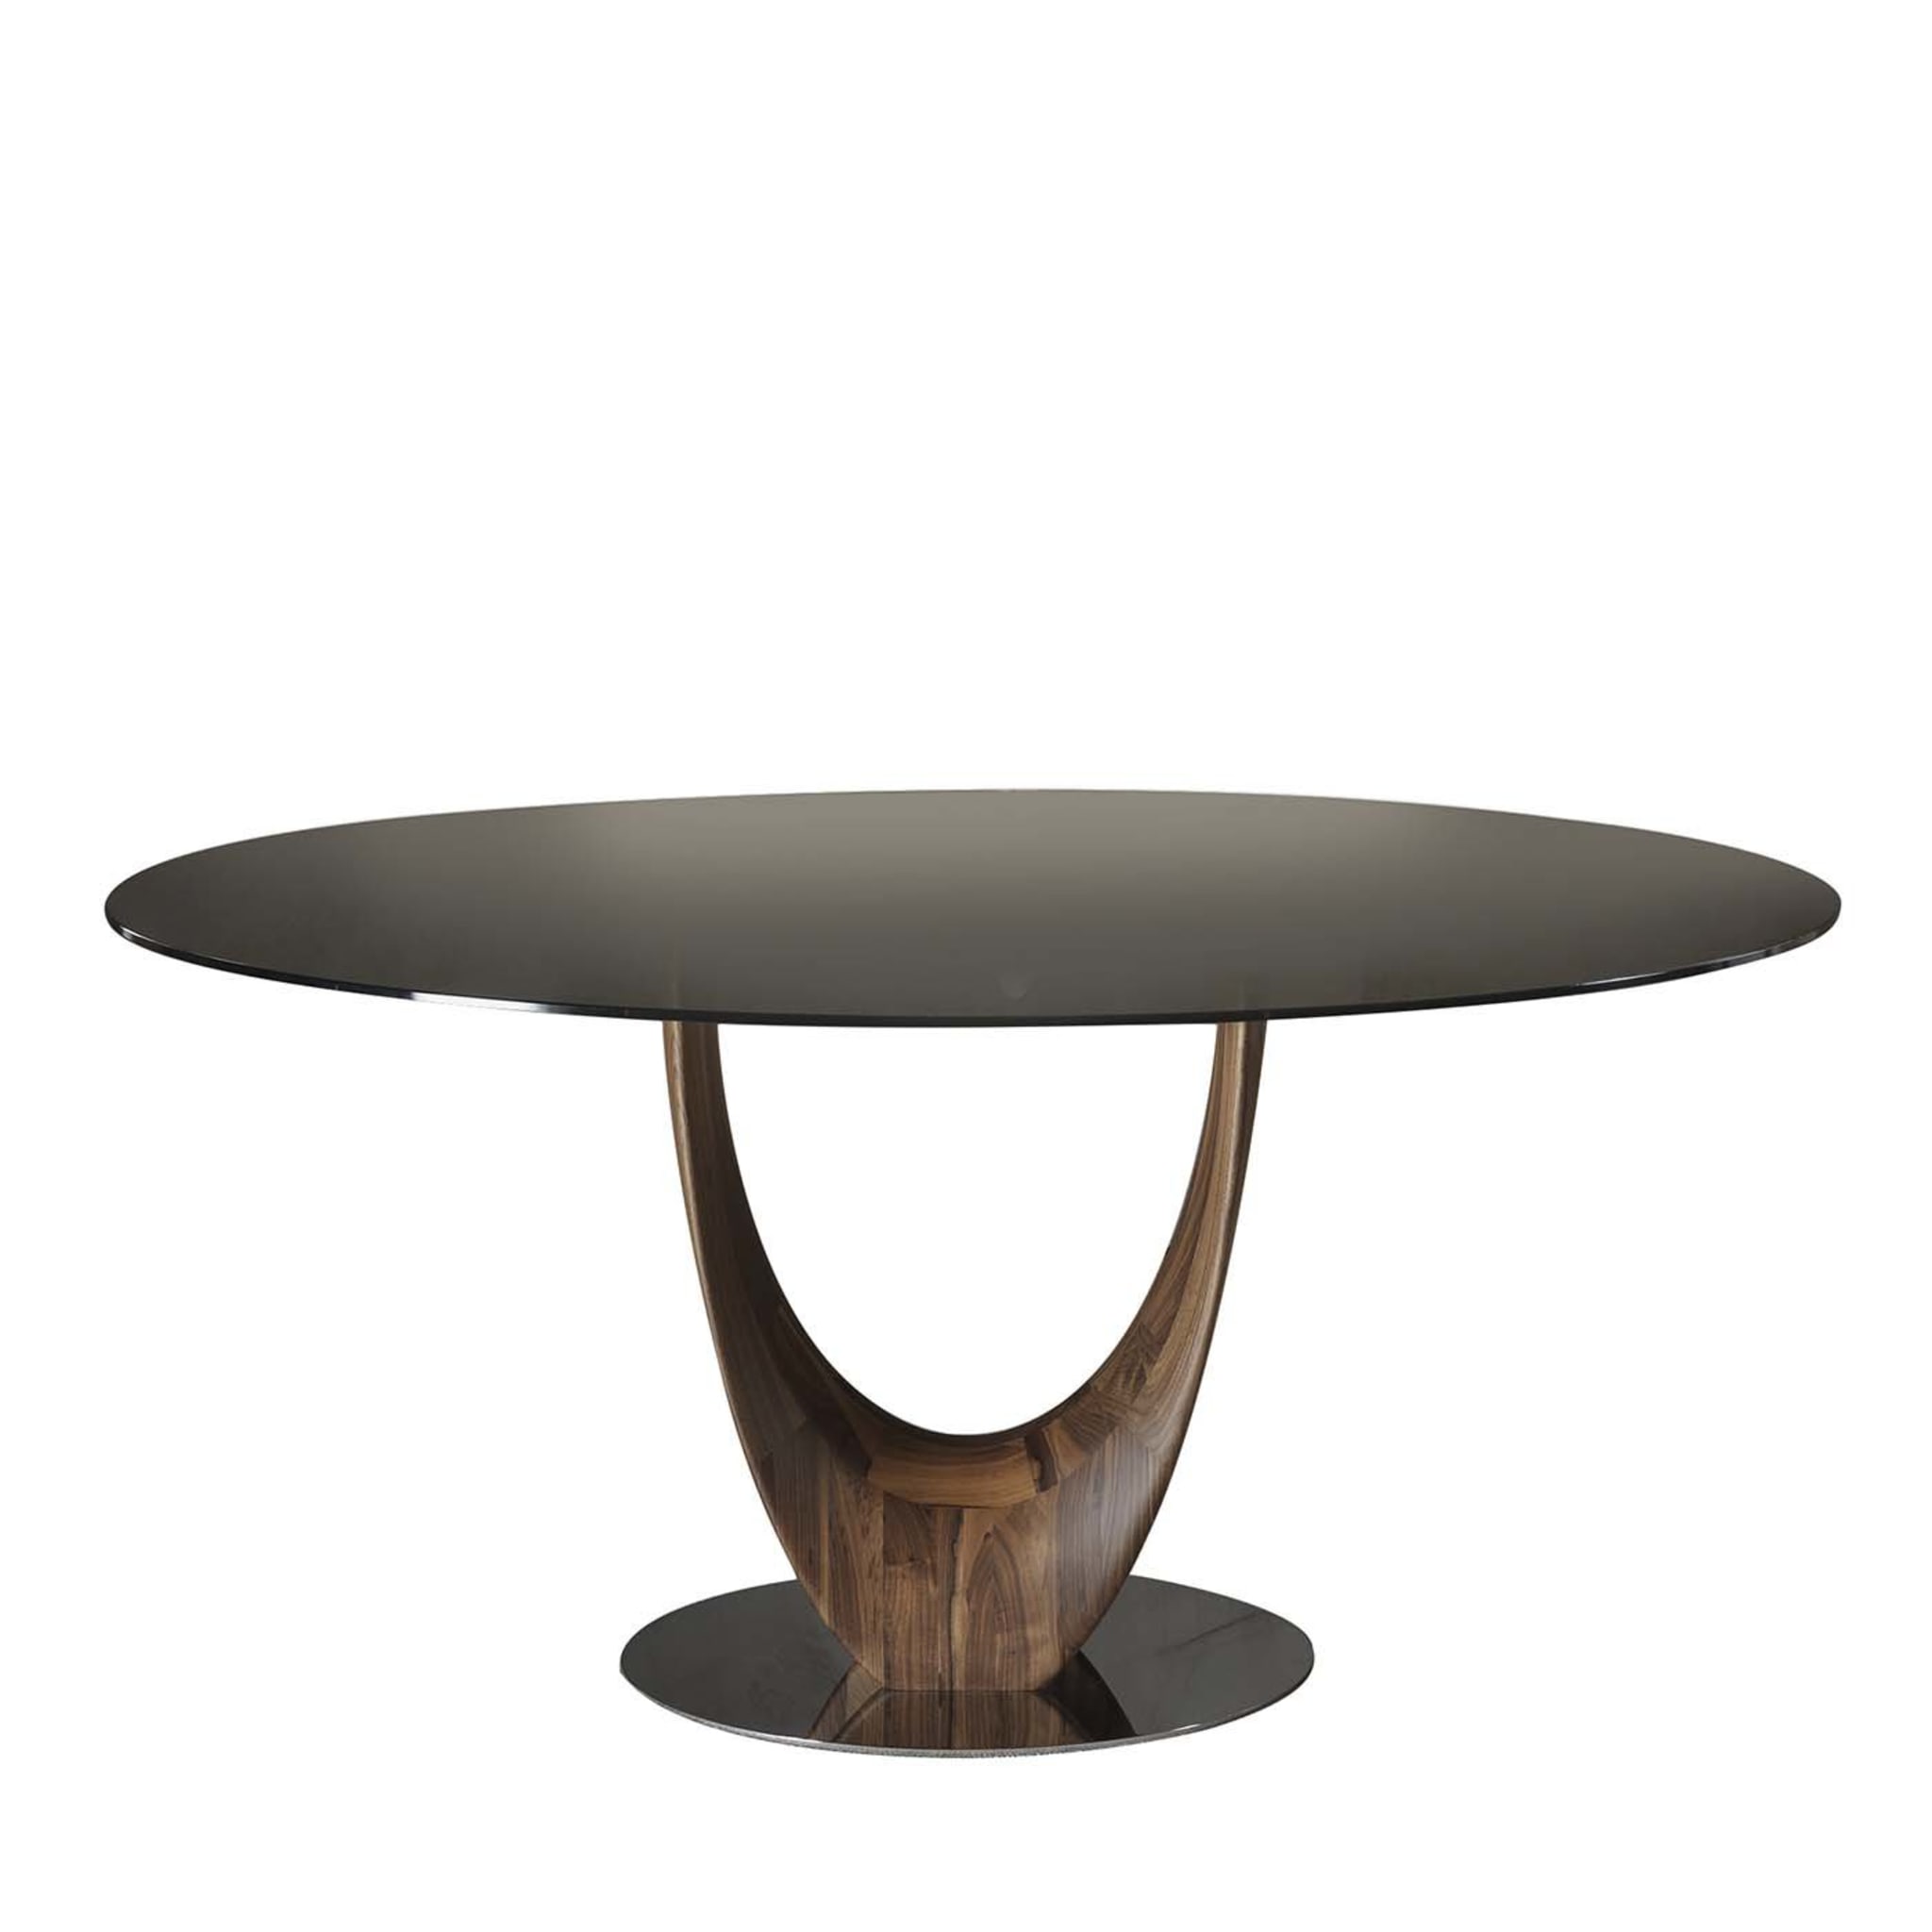 Axis Round Large Dining Table with Transparent Bronzed Glass Top by Stefano Bigi - Main view